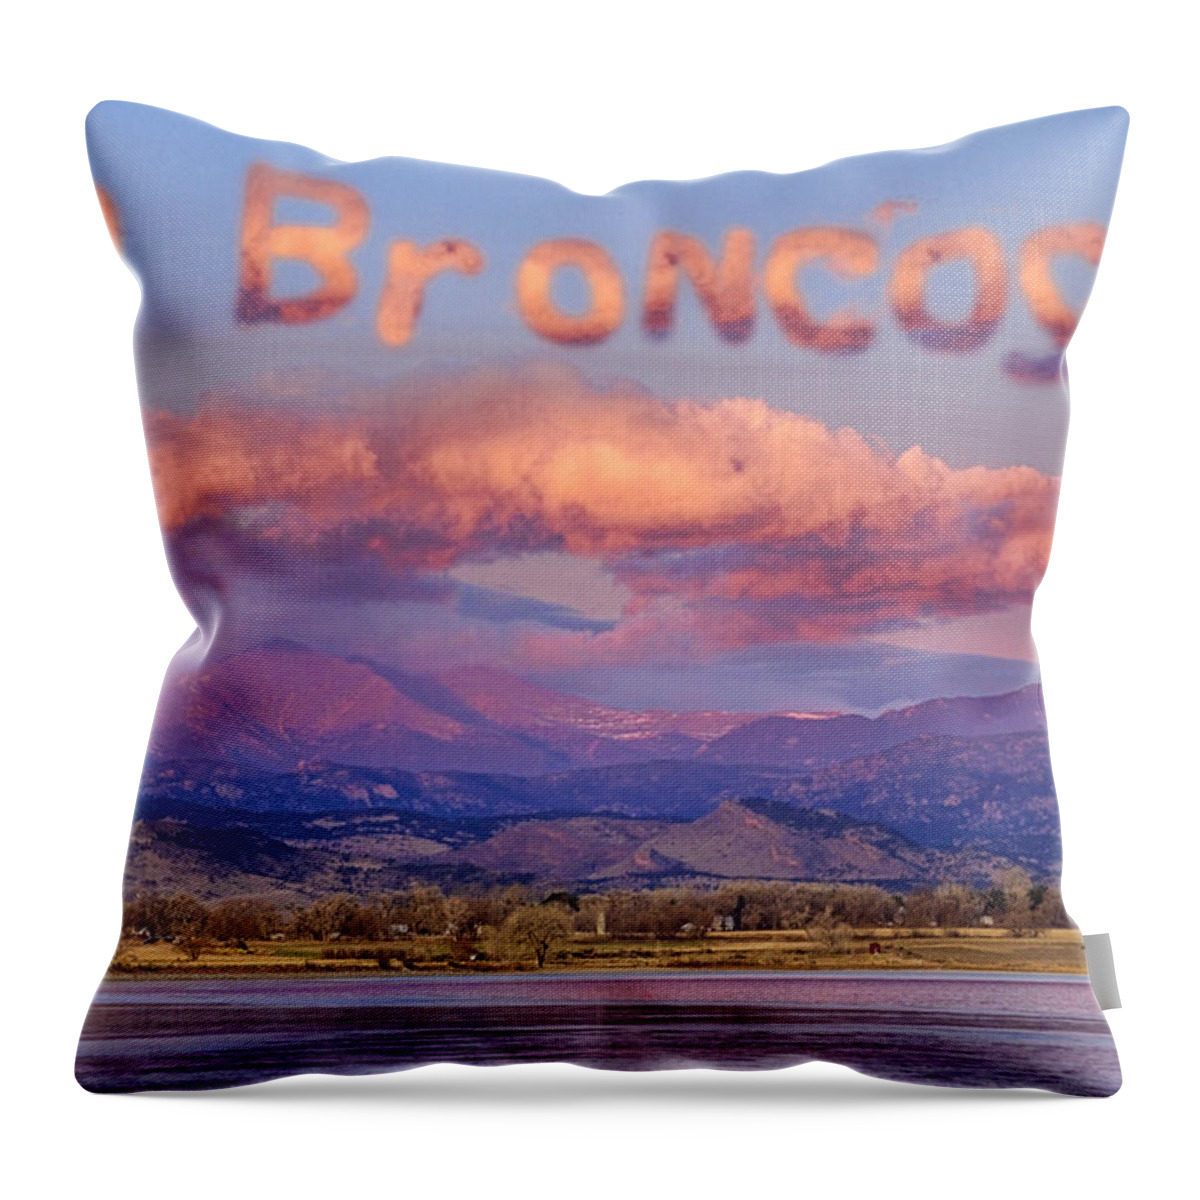 Go Broncos Throw Pillow featuring the photograph Go Broncos Colorado Front Range Longs Moon Sunrise by James BO Insogna